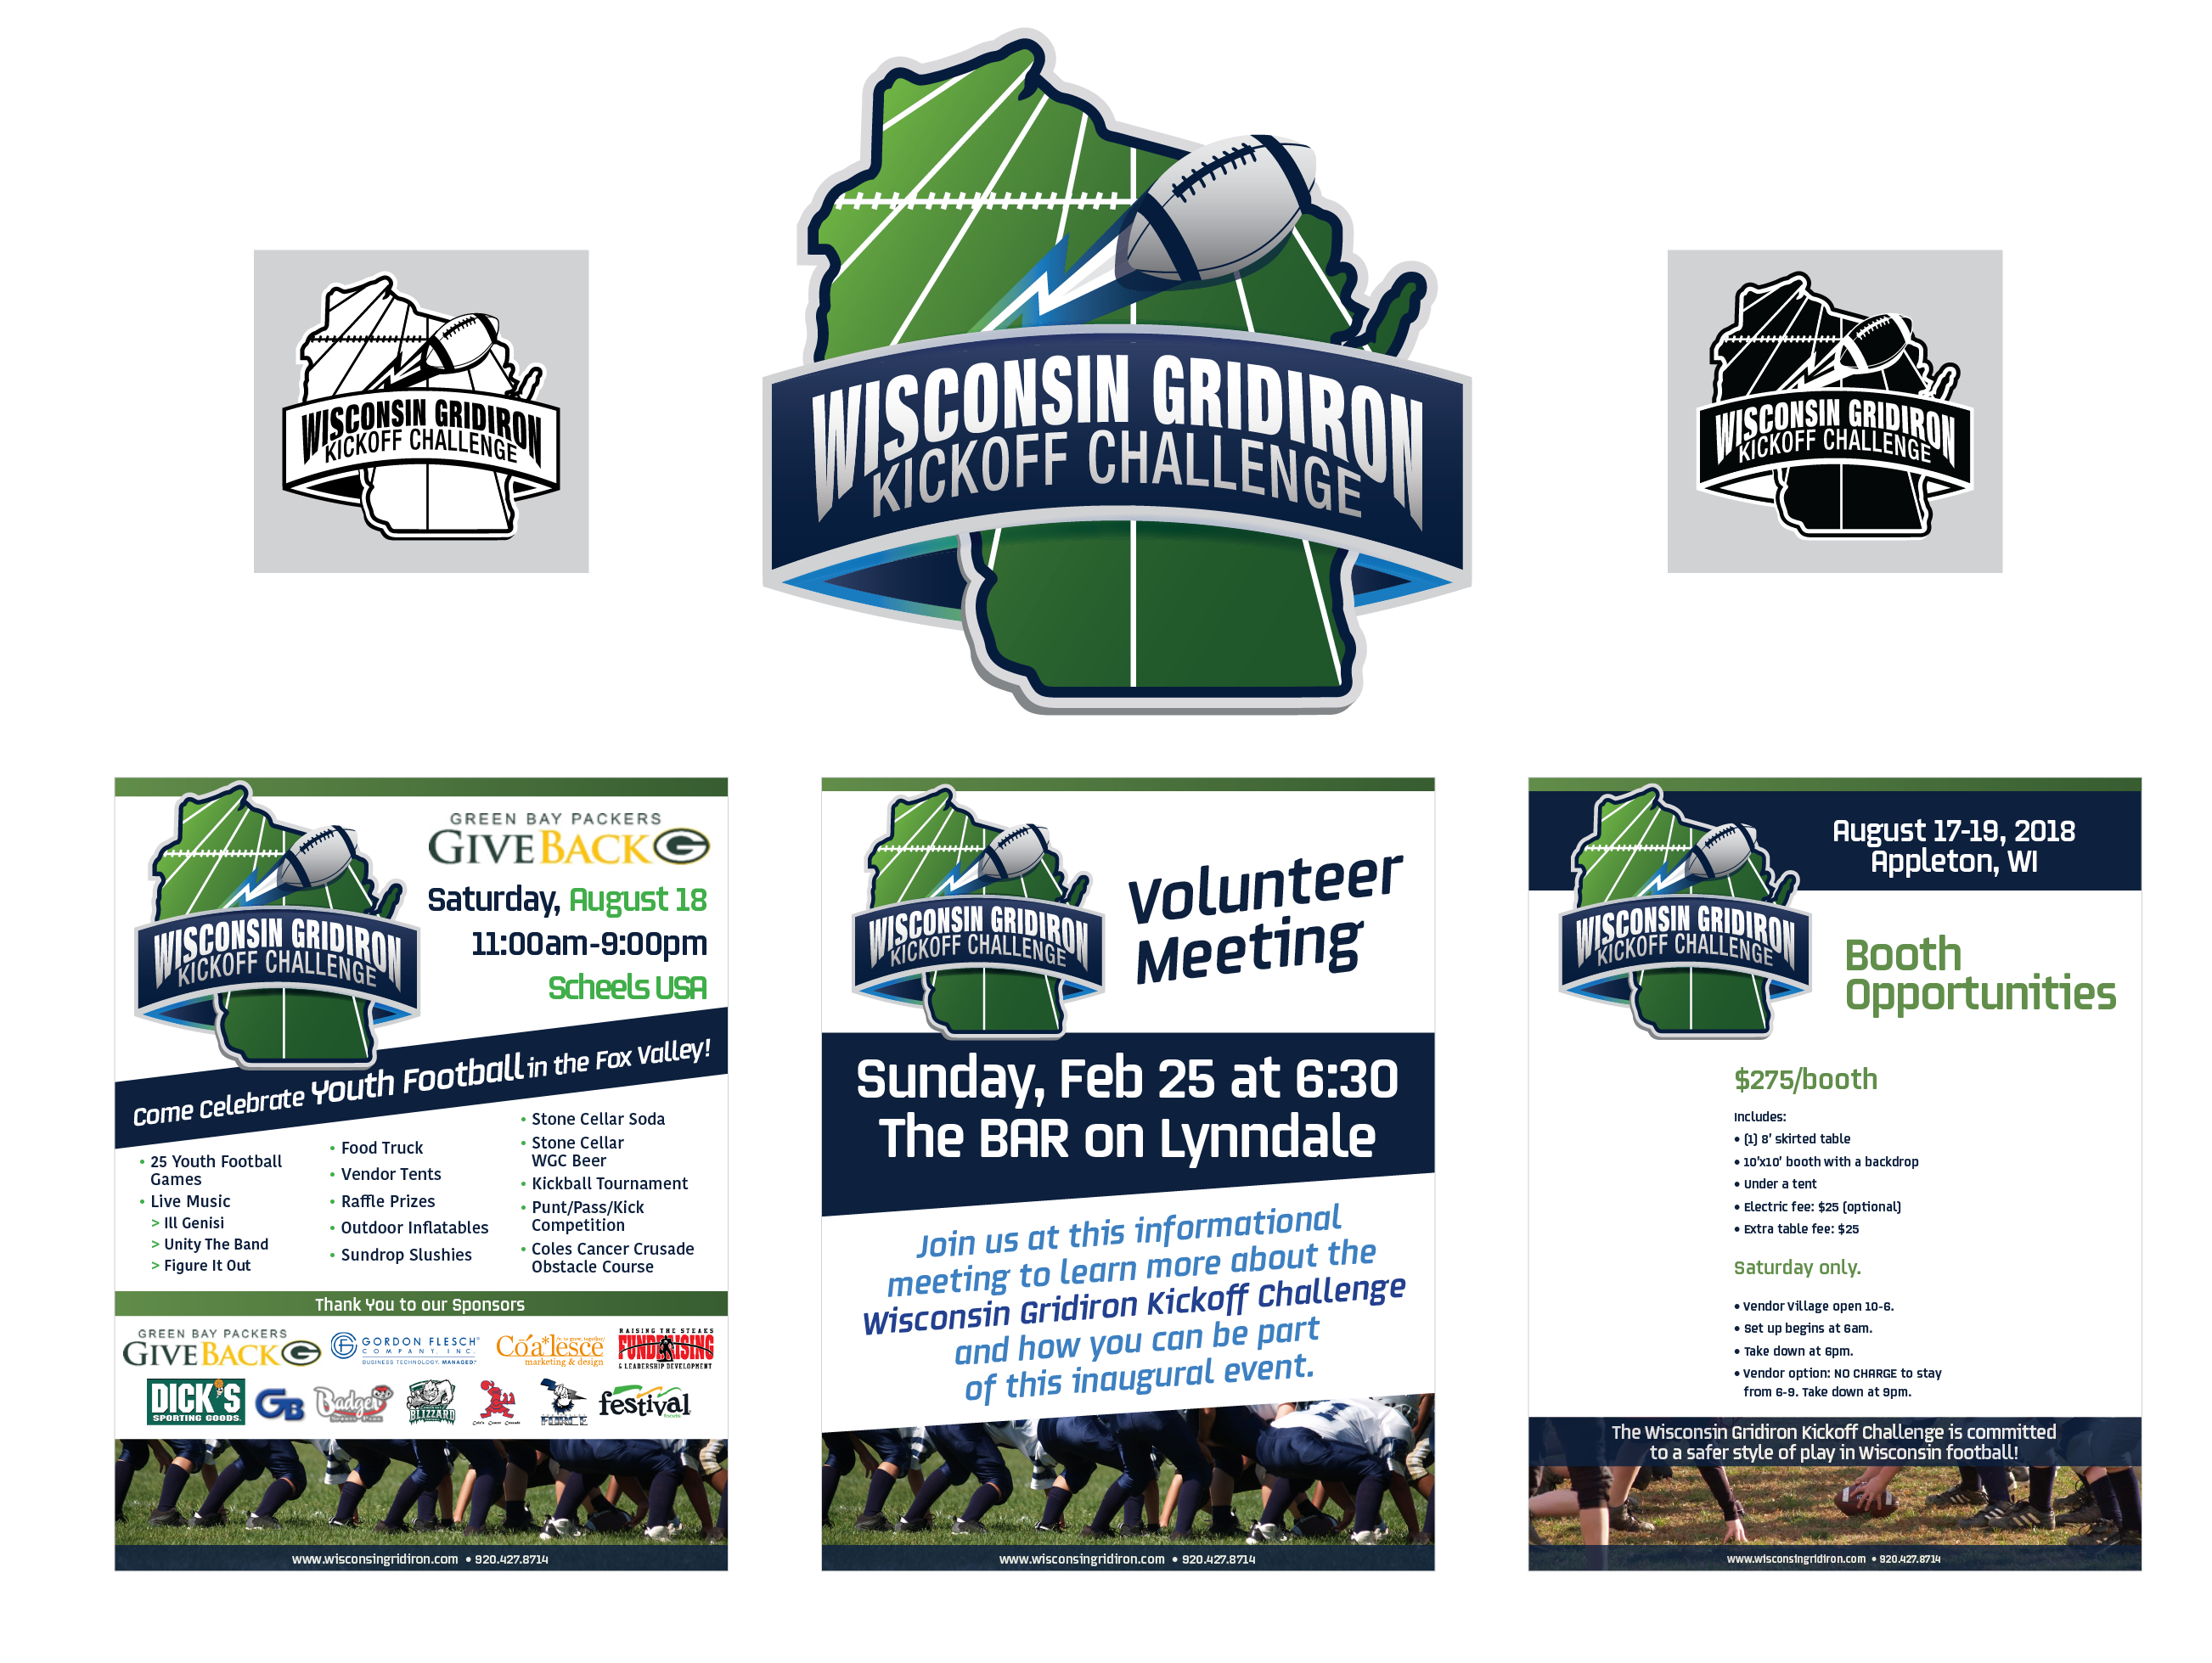 Wisconsin Gridiron Kickoff Challenge logo and print collateral